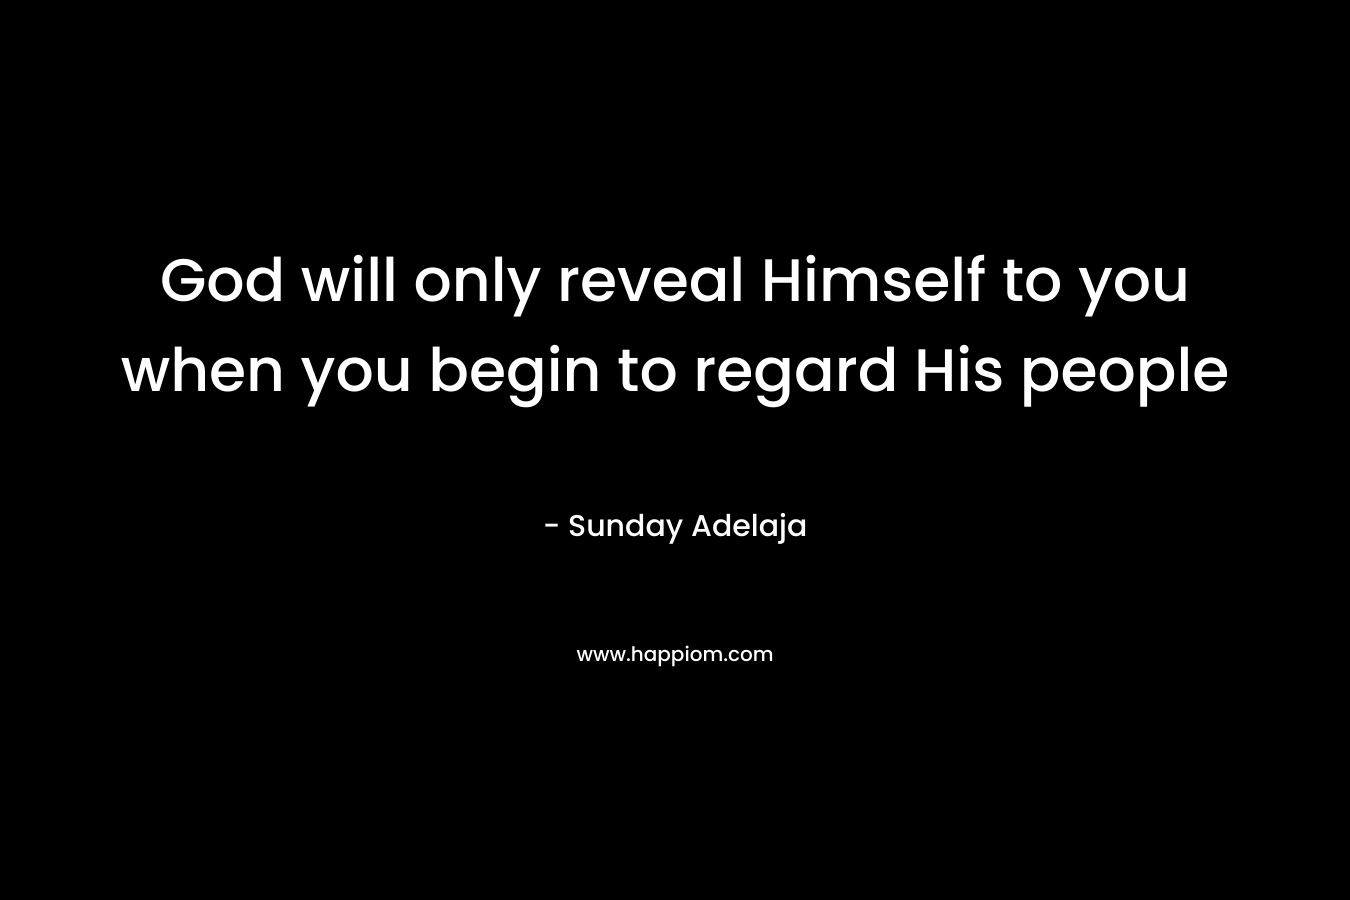 God will only reveal Himself to you when you begin to regard His people